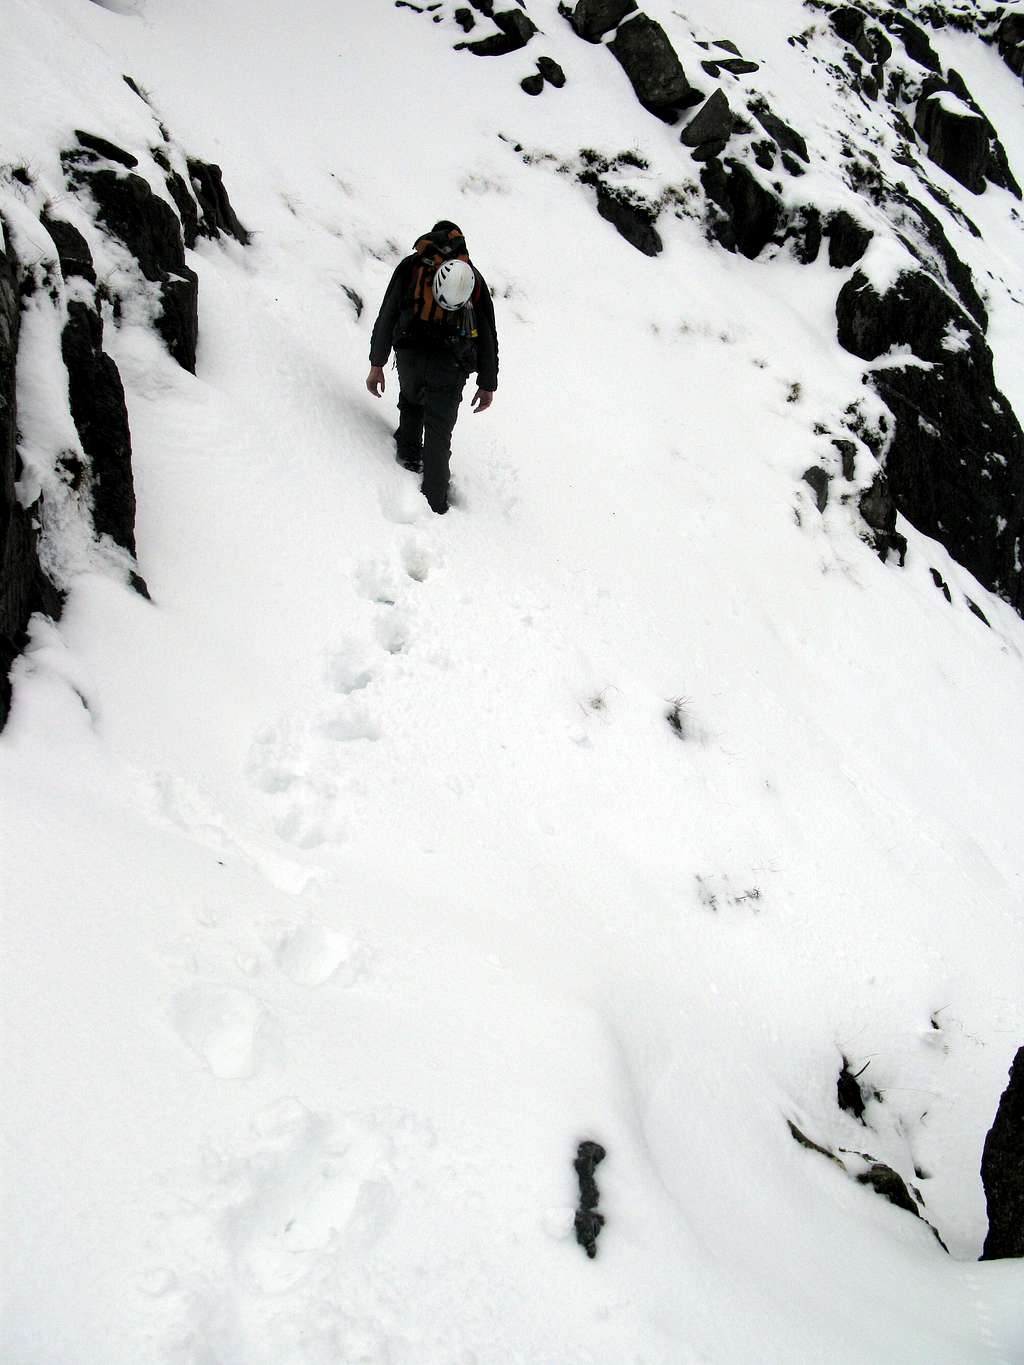 On ascent of the north face of Glyder Fach